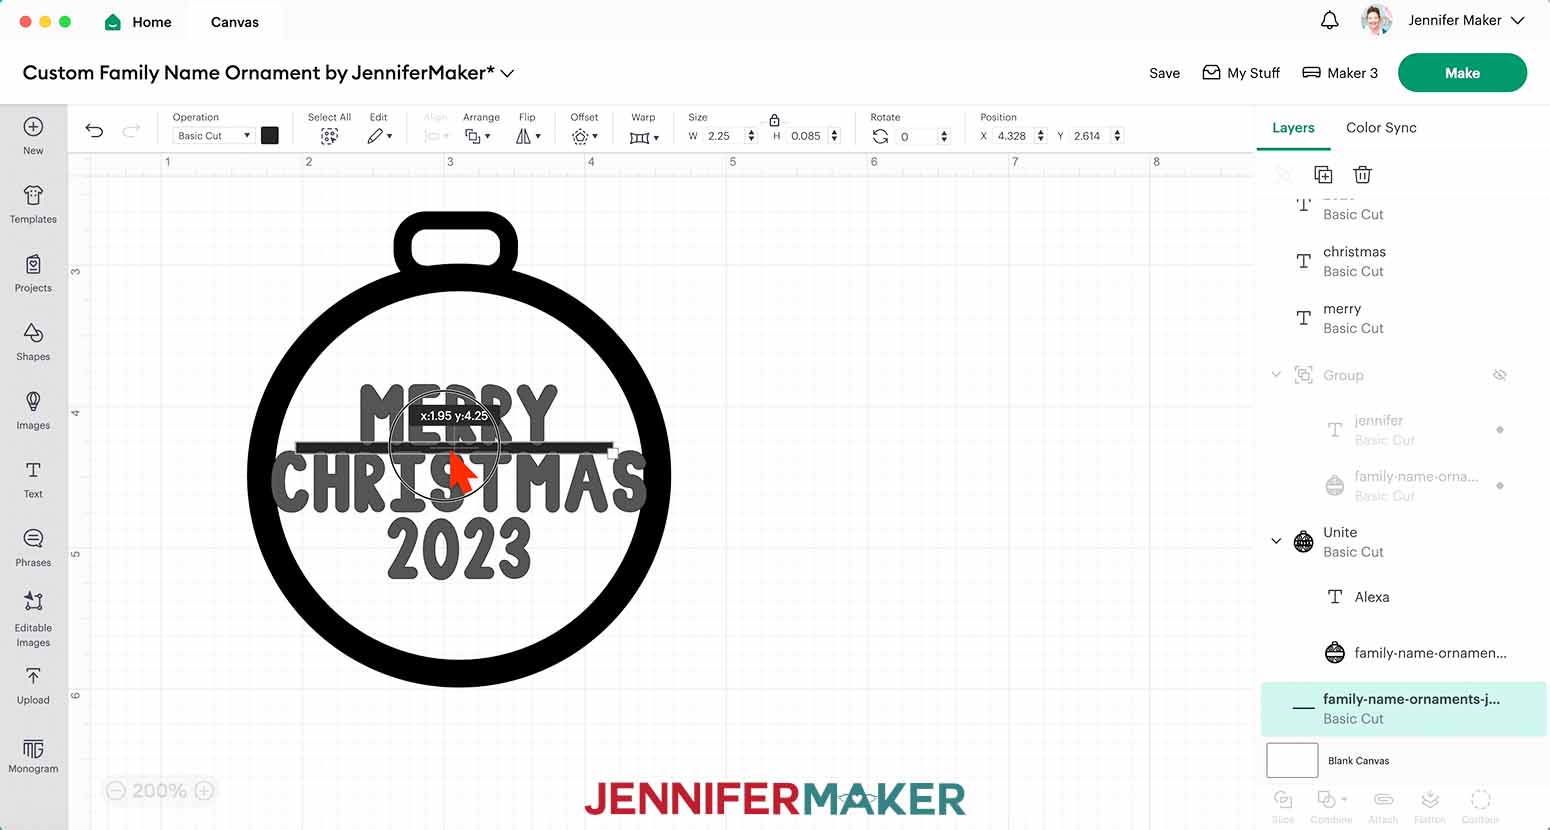 Place the horizontal line overlapping the bottom of the text in "Merry" and the top of the text in "Christmas."